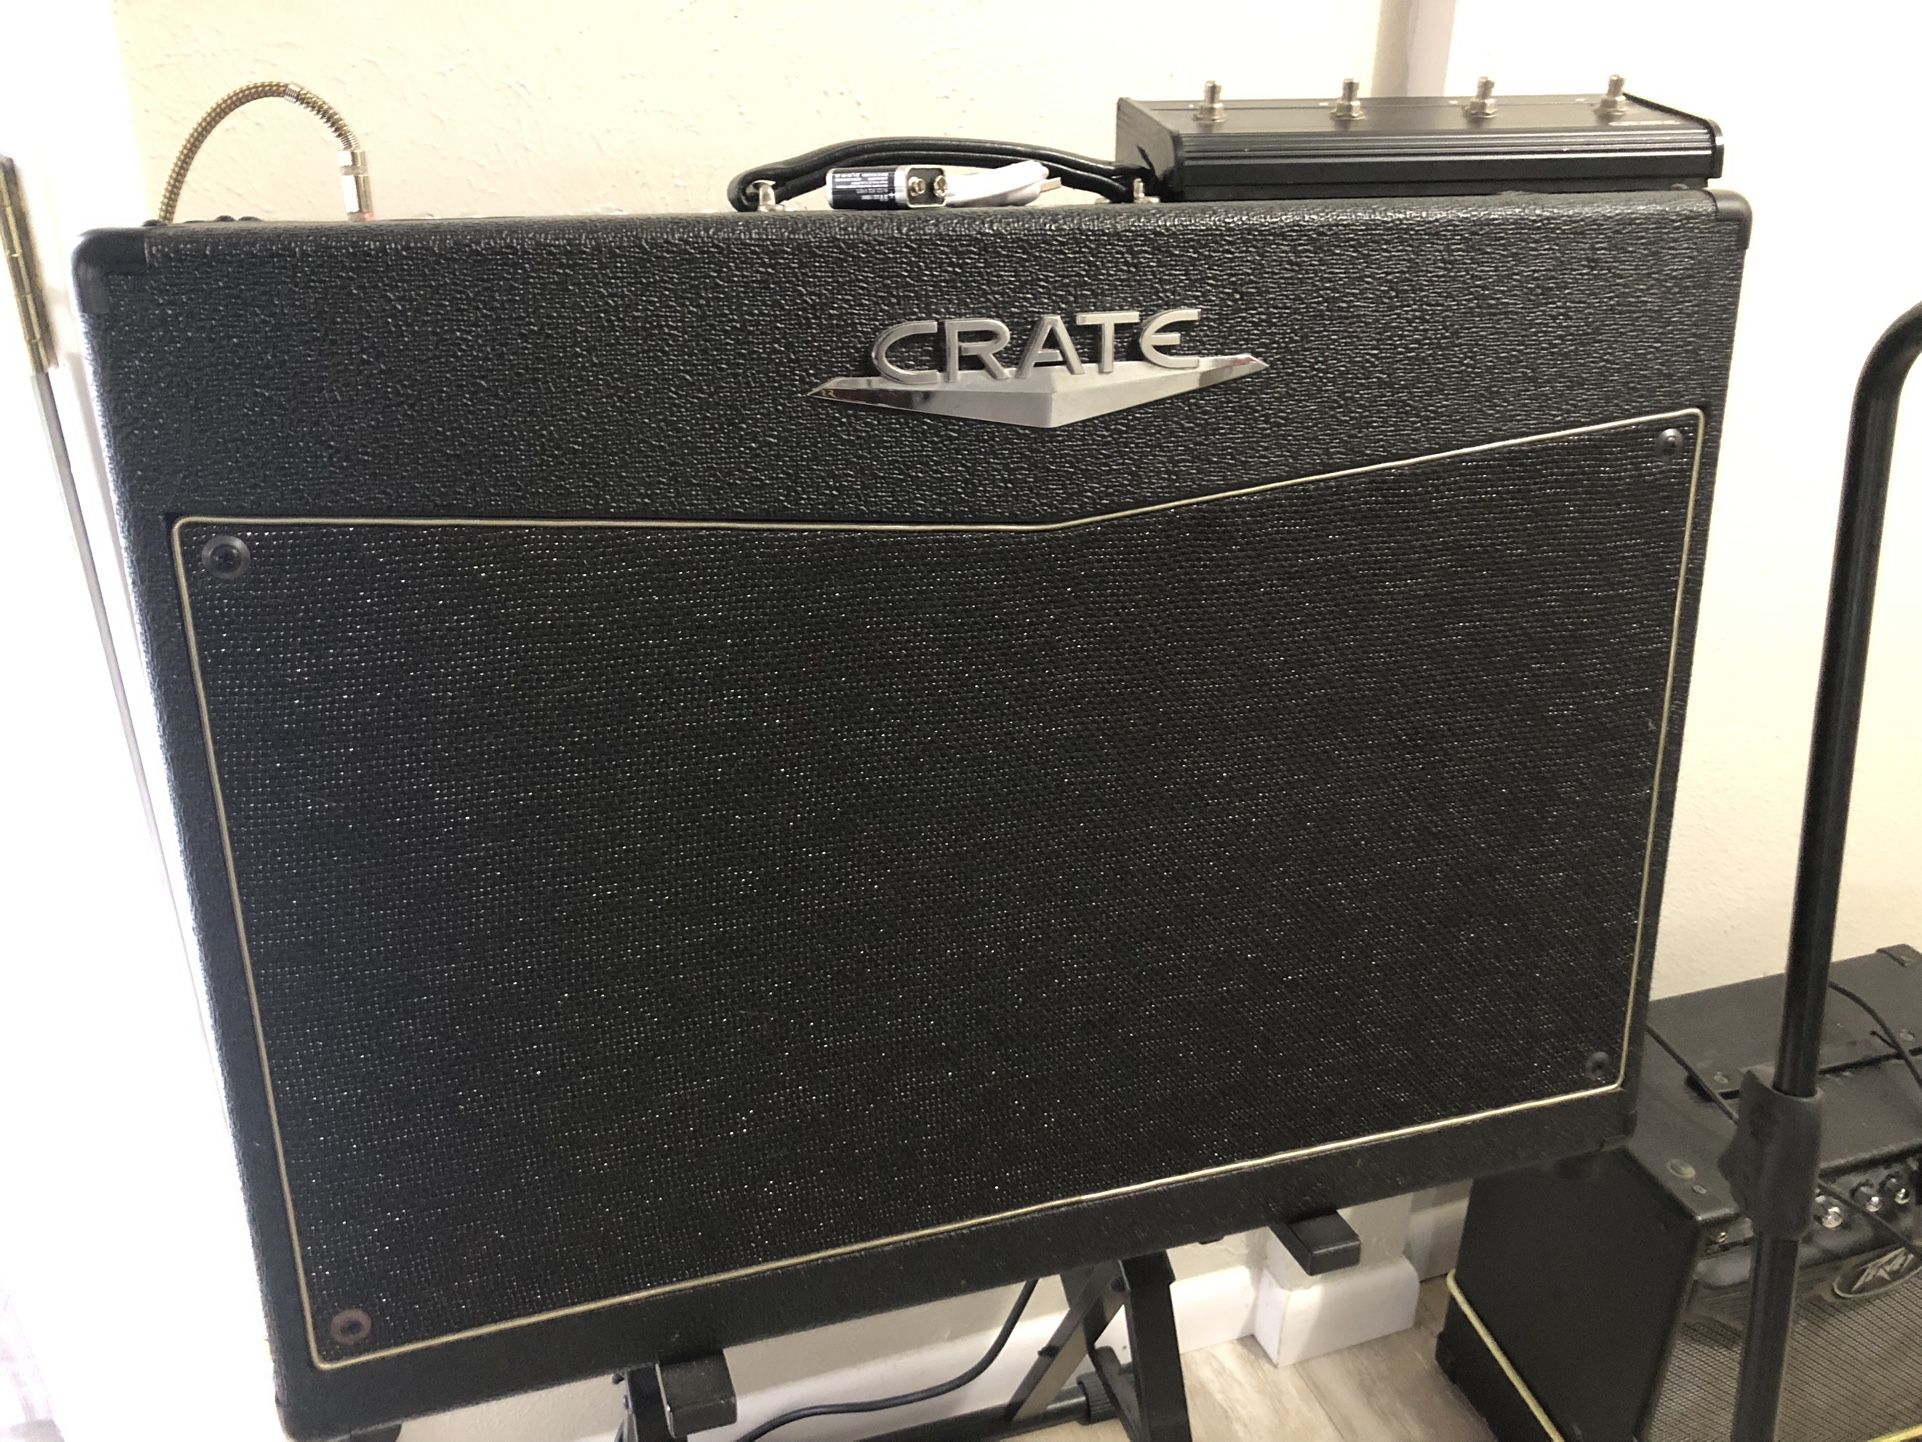 Crate VTX 212 Amp (vh140c Tone Clone) Speakers Included Ready To Rock!